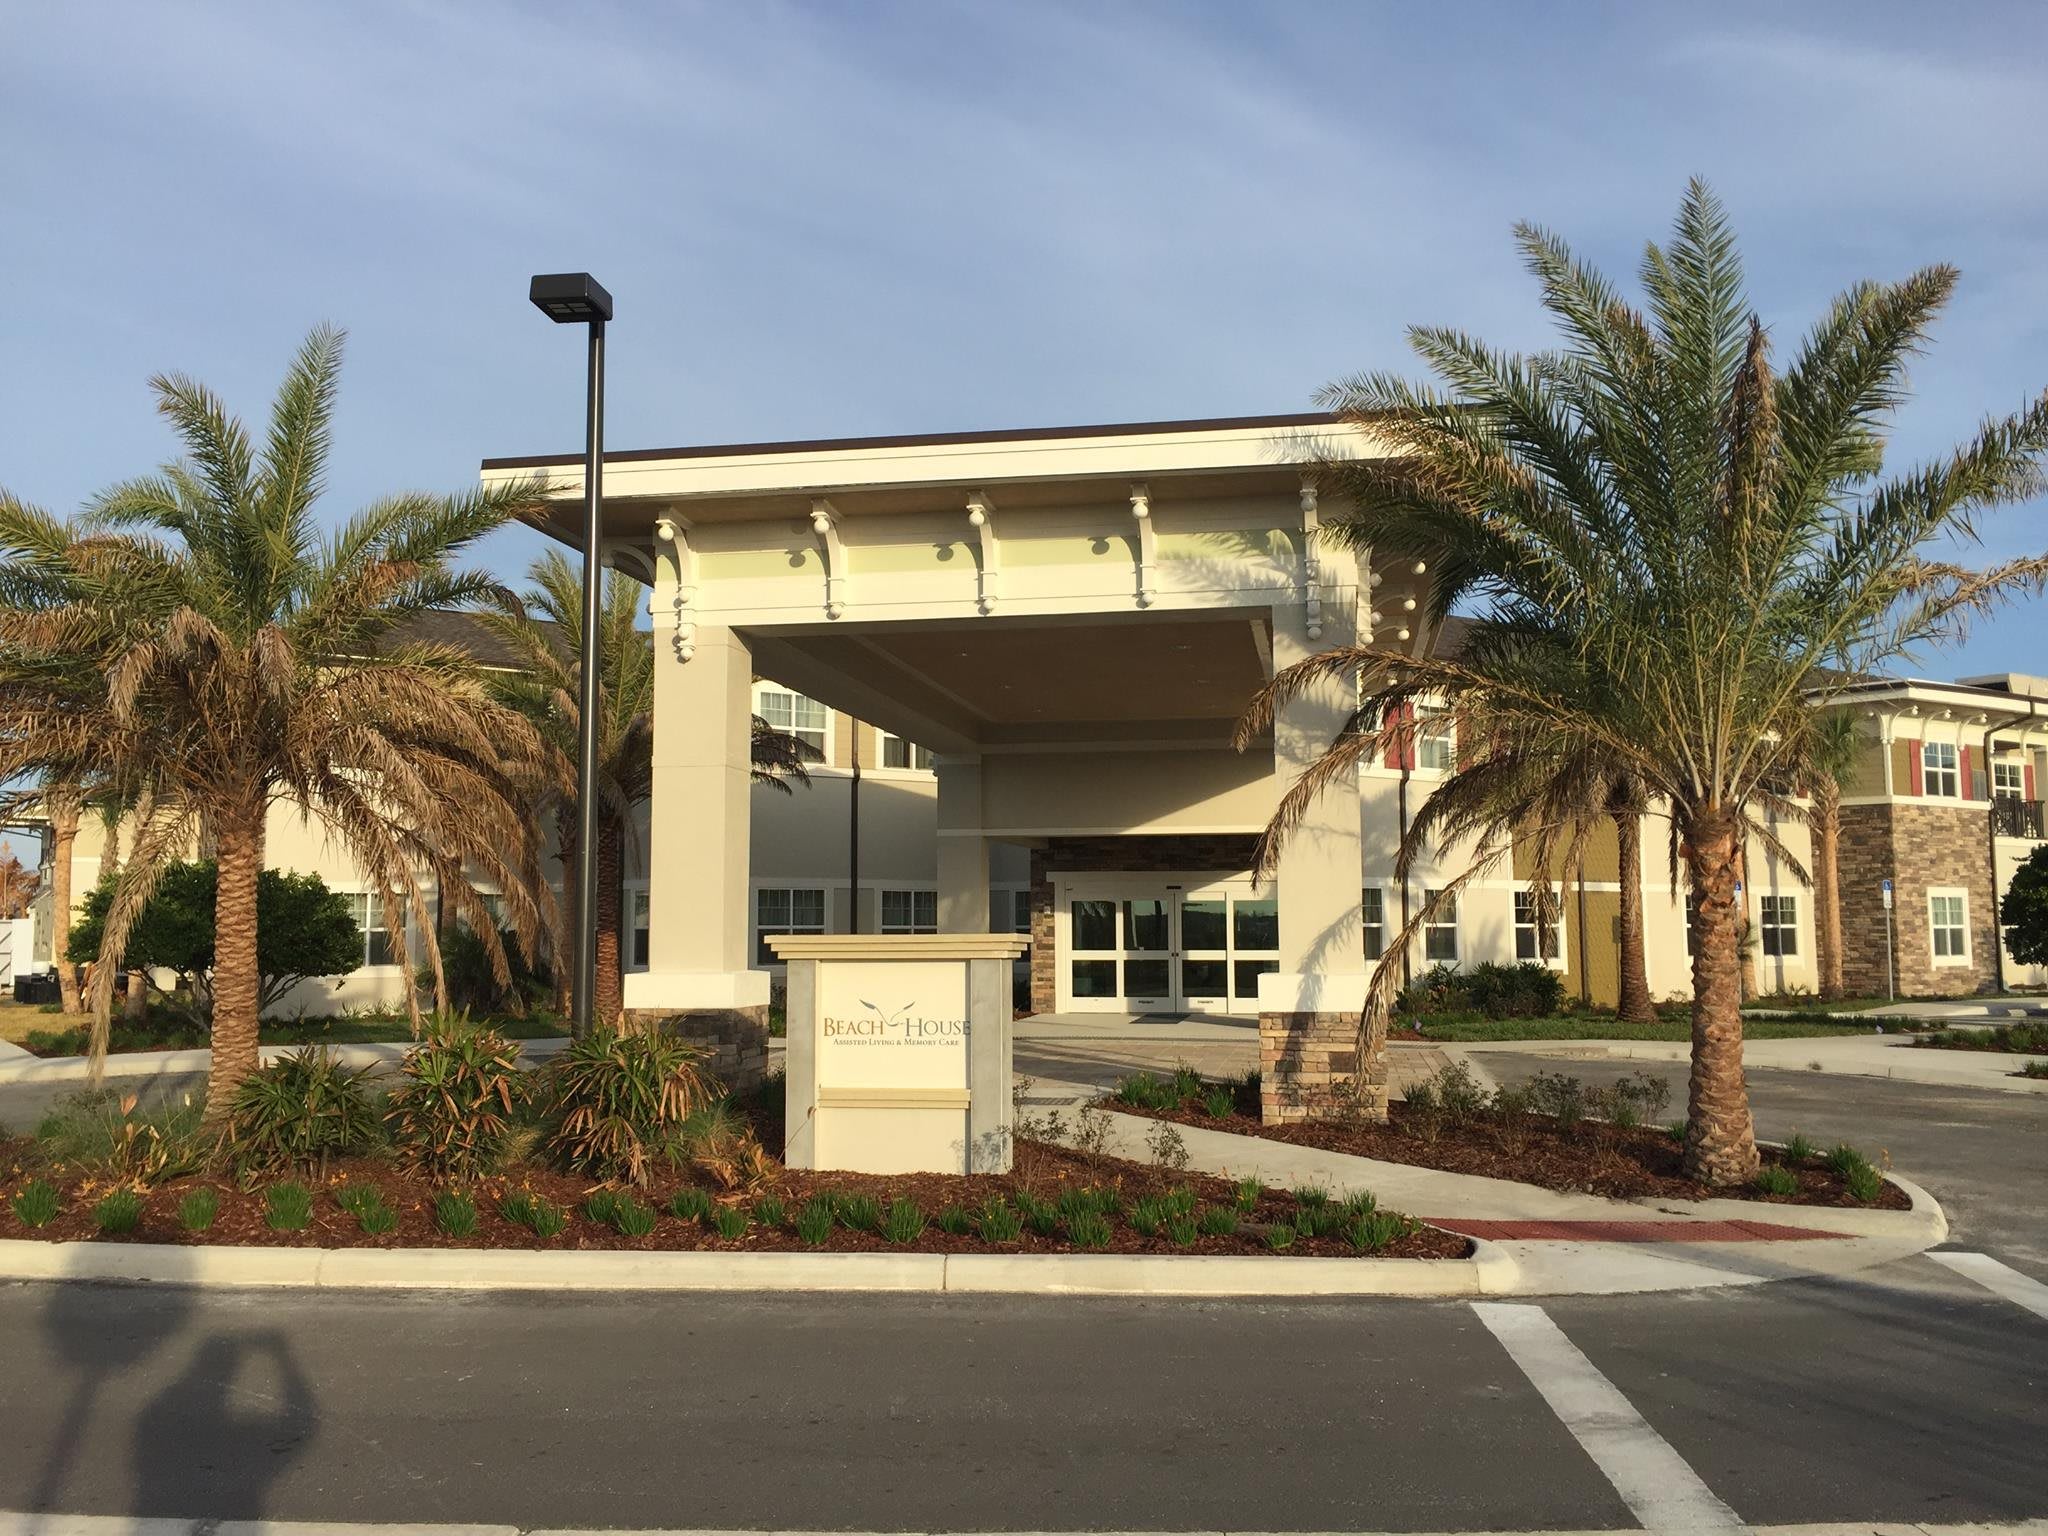 Beach House Assisted Living & Memory Care at Wiregrass Ranch community exterior